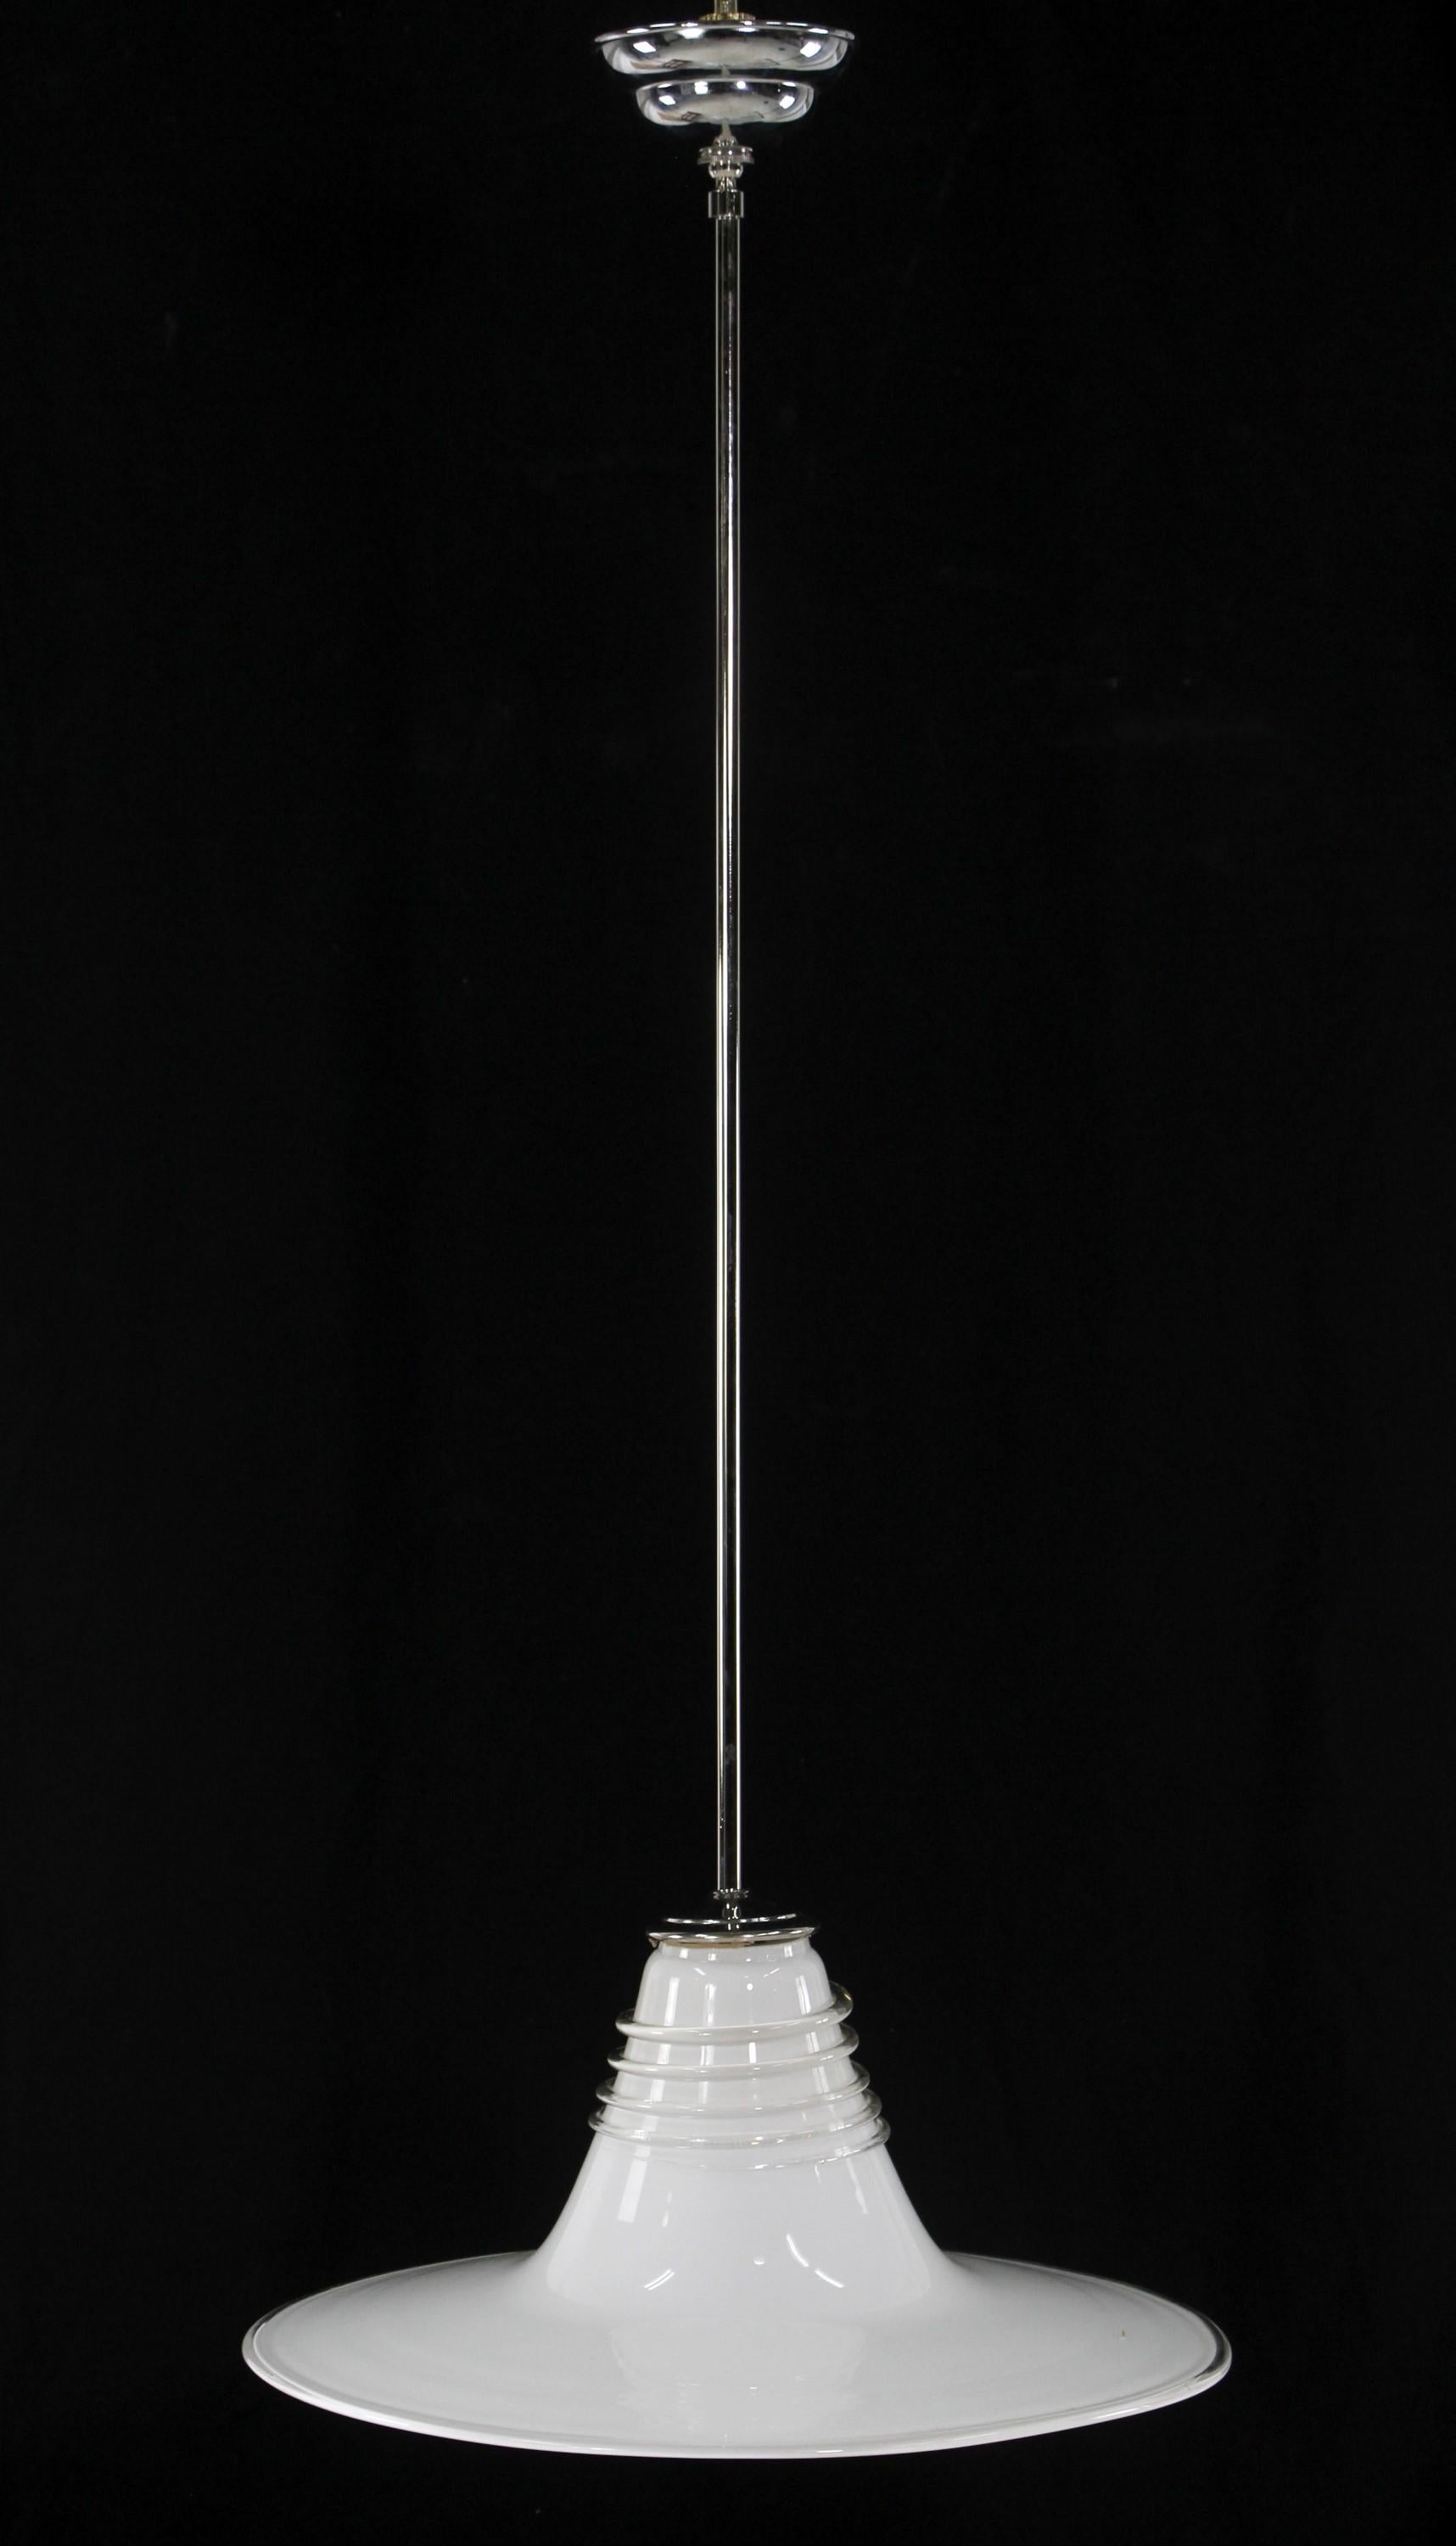 Italian Murano glass pendant light with swirled glass and a clear glass coil design on top portion. It is attached to a nickel over brass pole fitter newly wired. The glass is hand blown and white swirled. The price includes restoration.